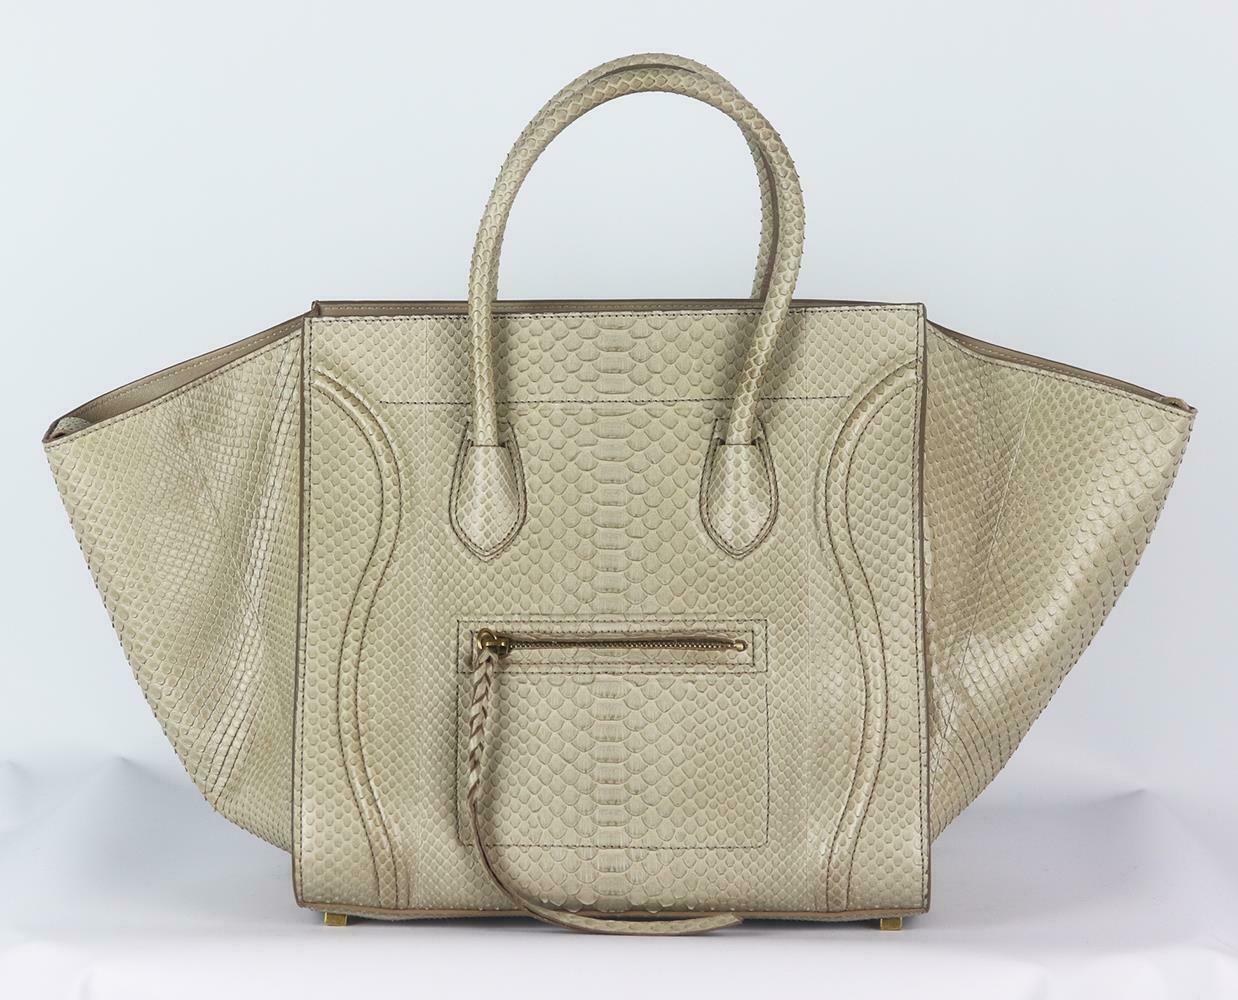 This flawlessly bag is crafted in beige python and leather phantom luggage tote bag has been part of Celine's timeless collection, it's designed with internal pockets and an oversized external flaps which can be pulled in to ensure your belongings